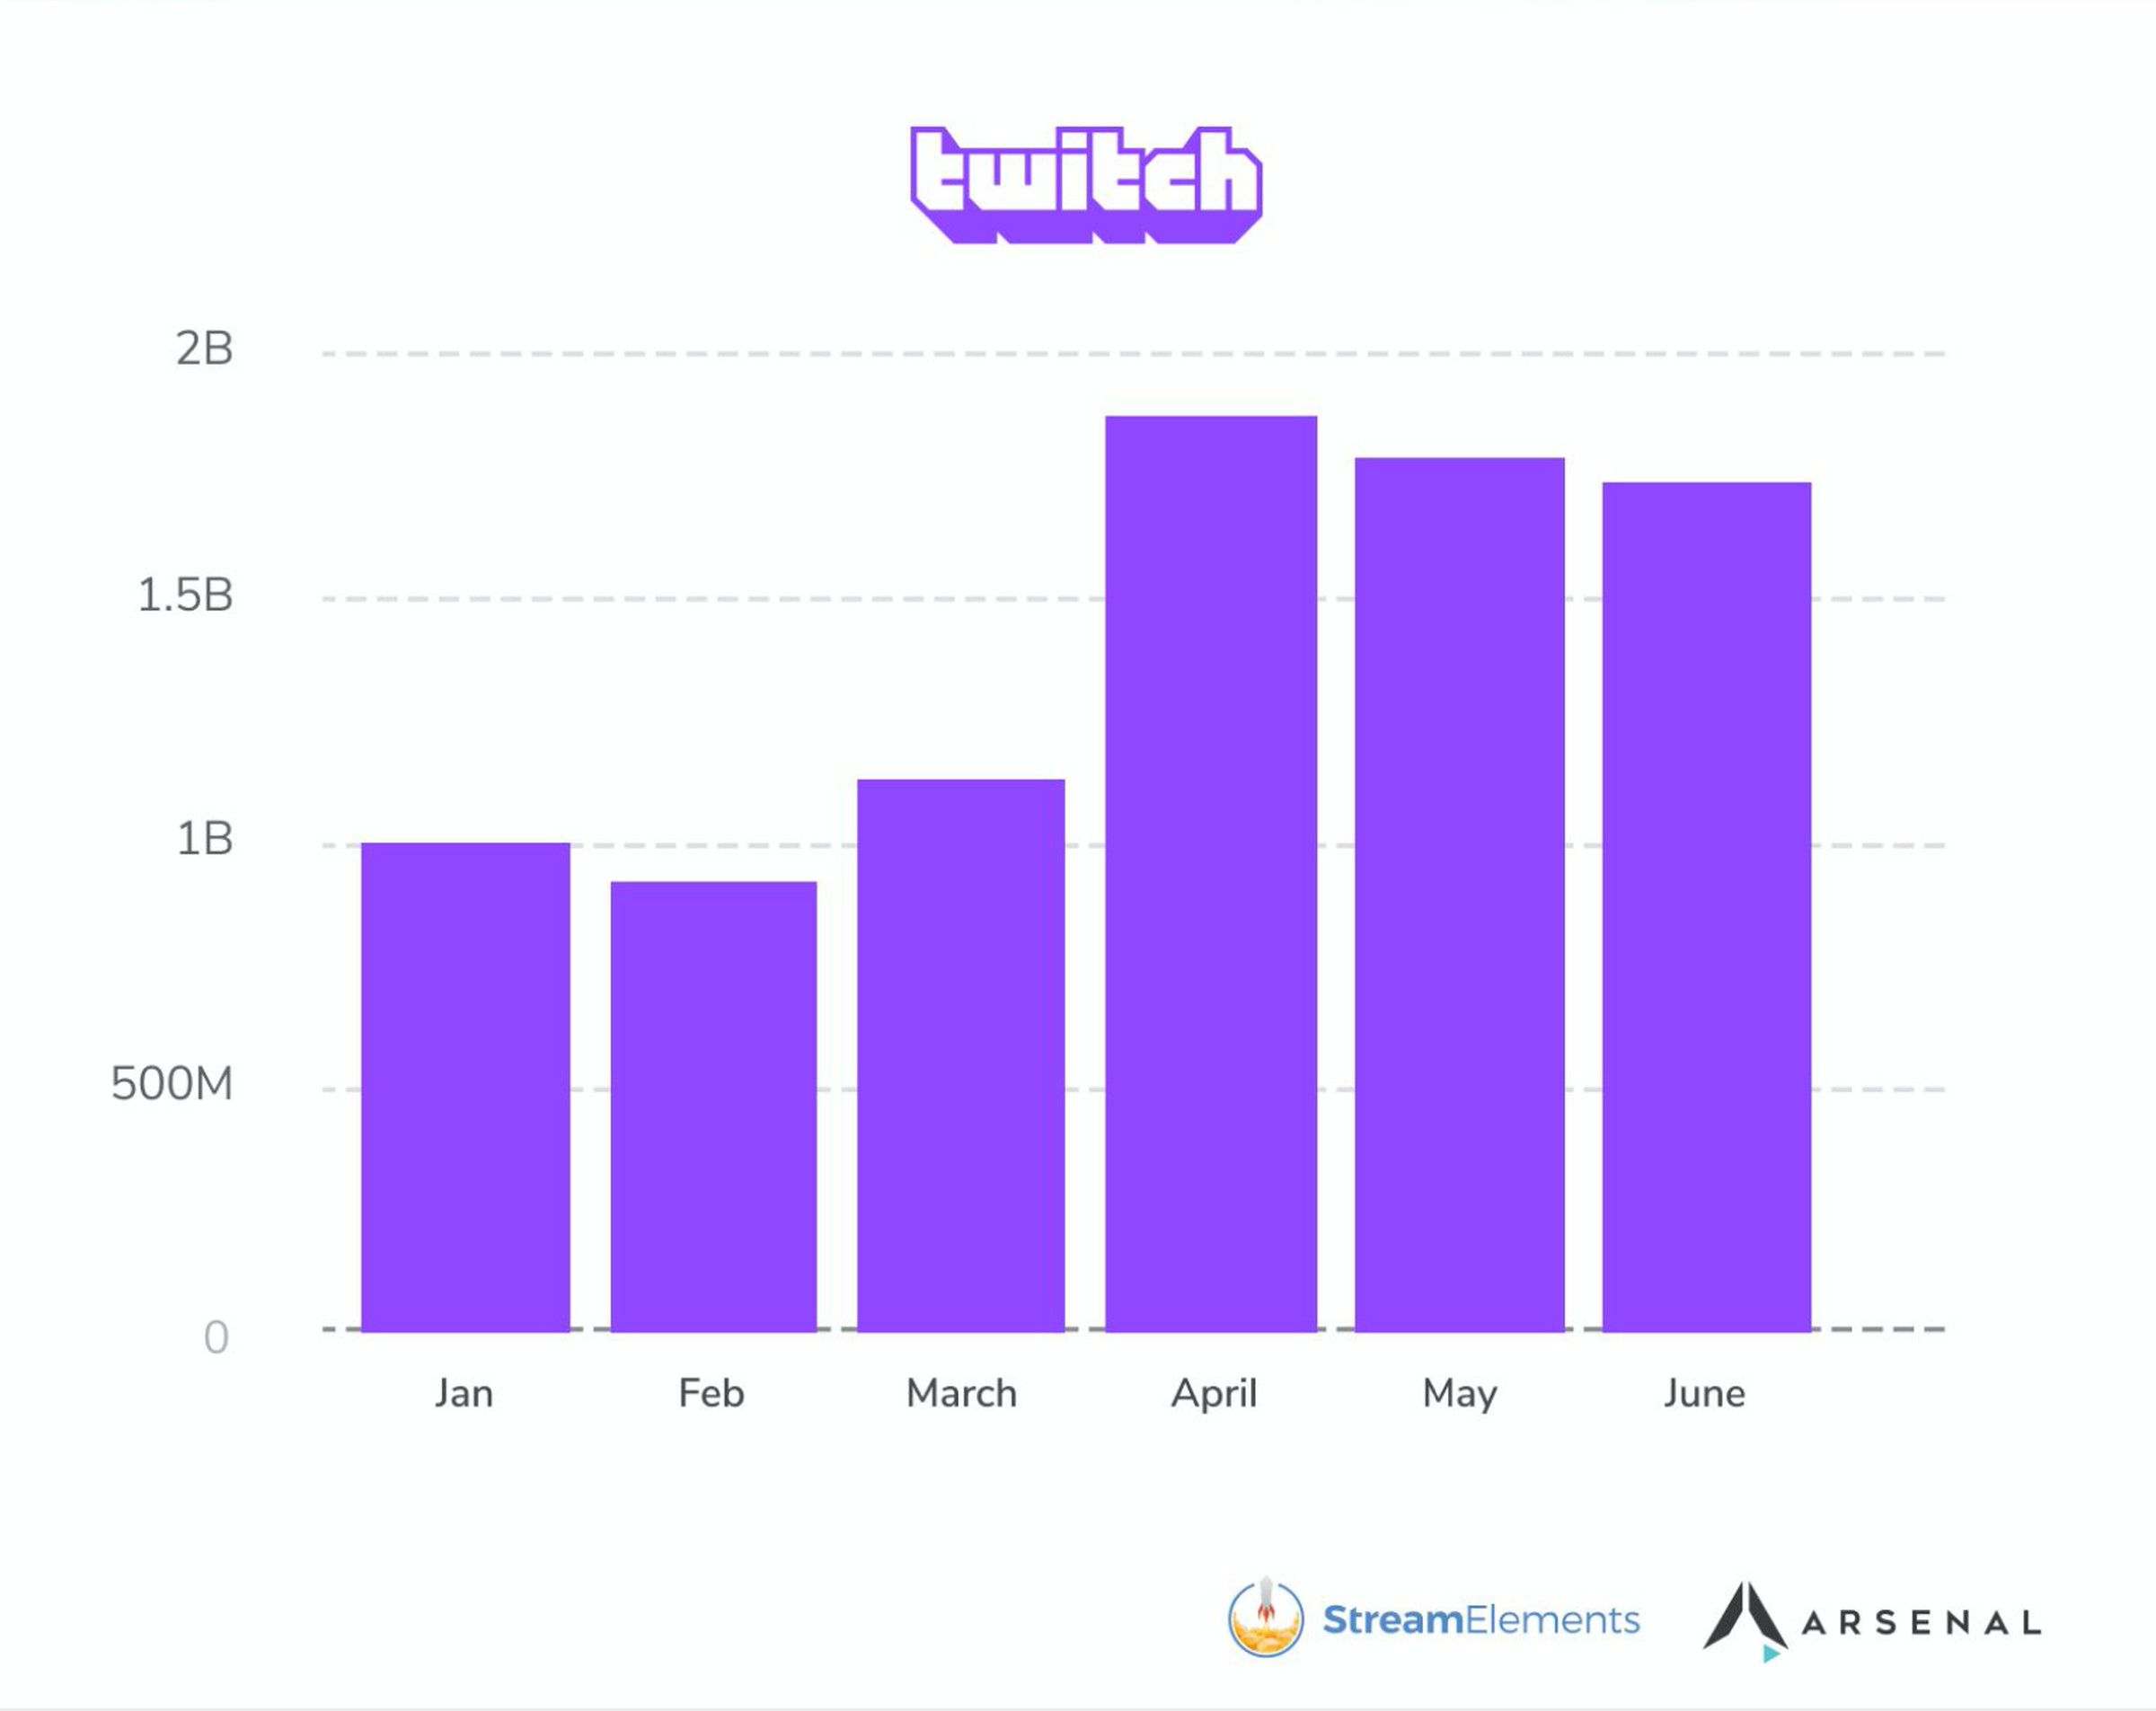 A chart showing Twitch viewership by hours watched from January through June.